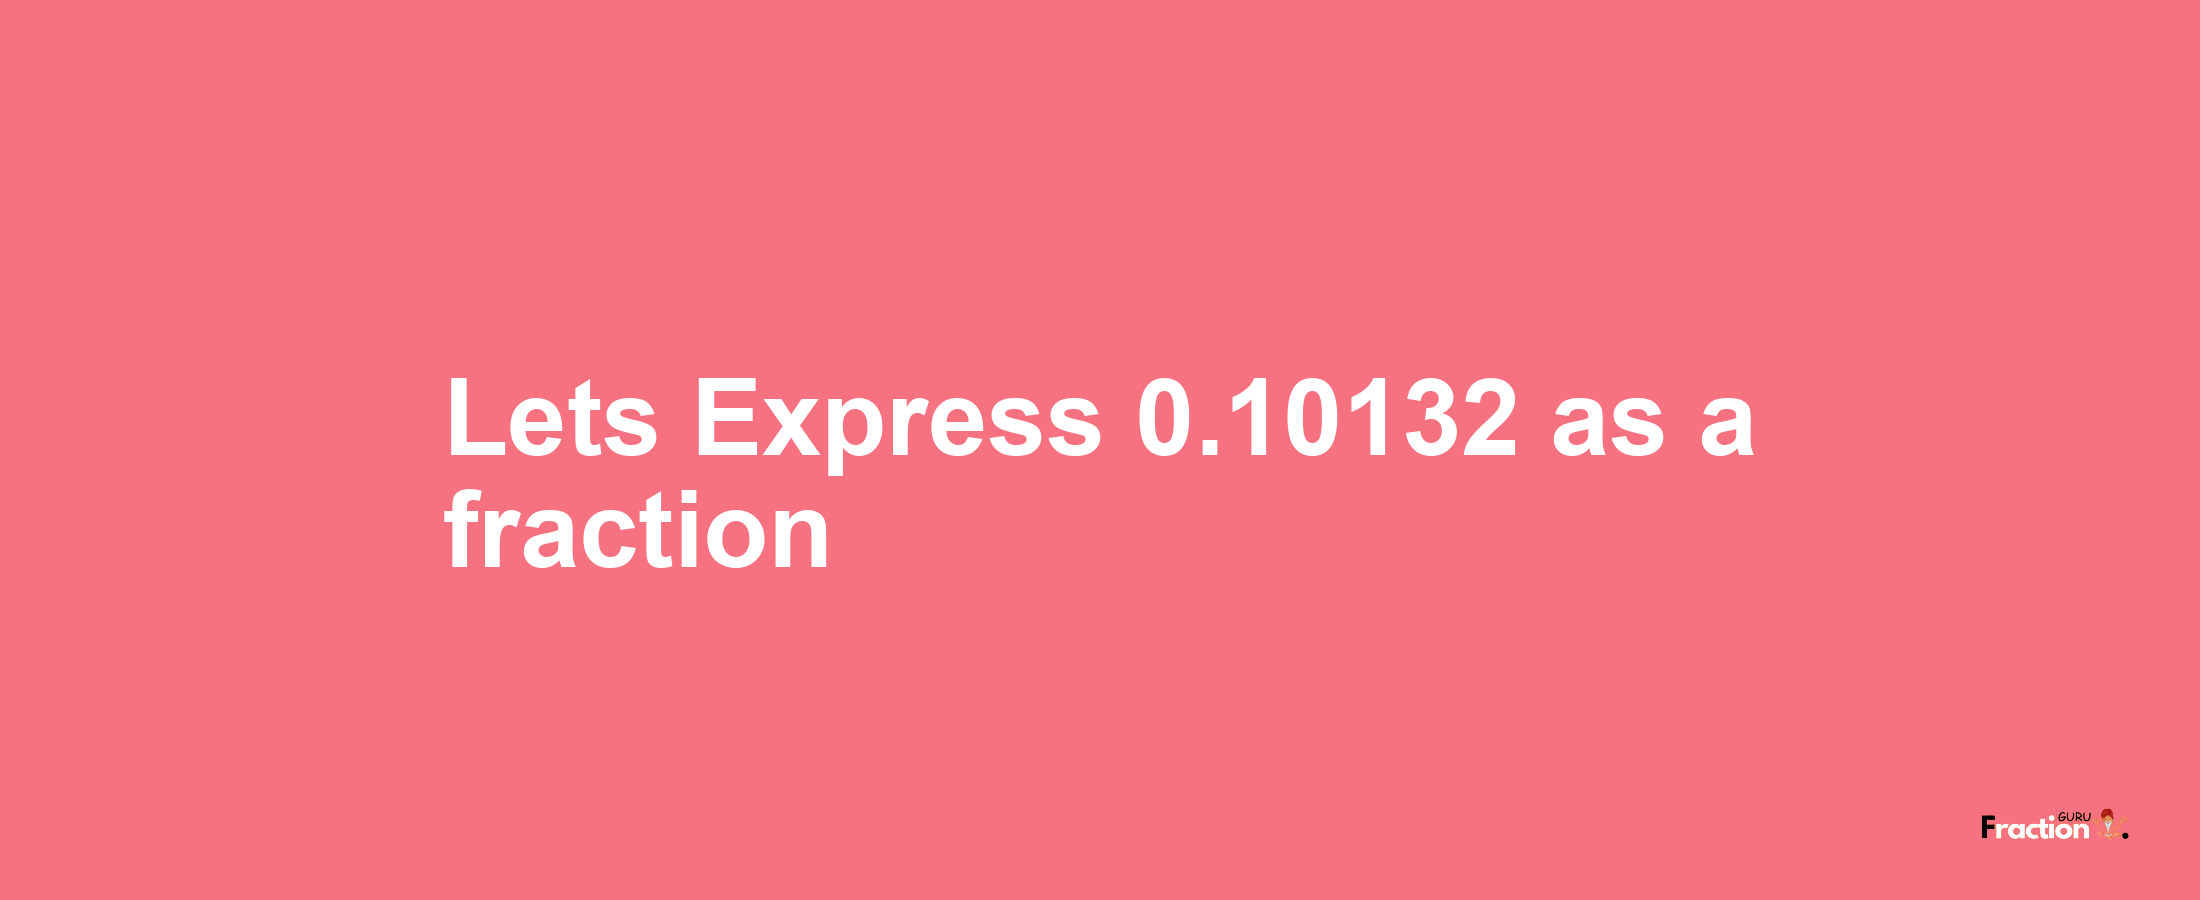 Lets Express 0.10132 as afraction